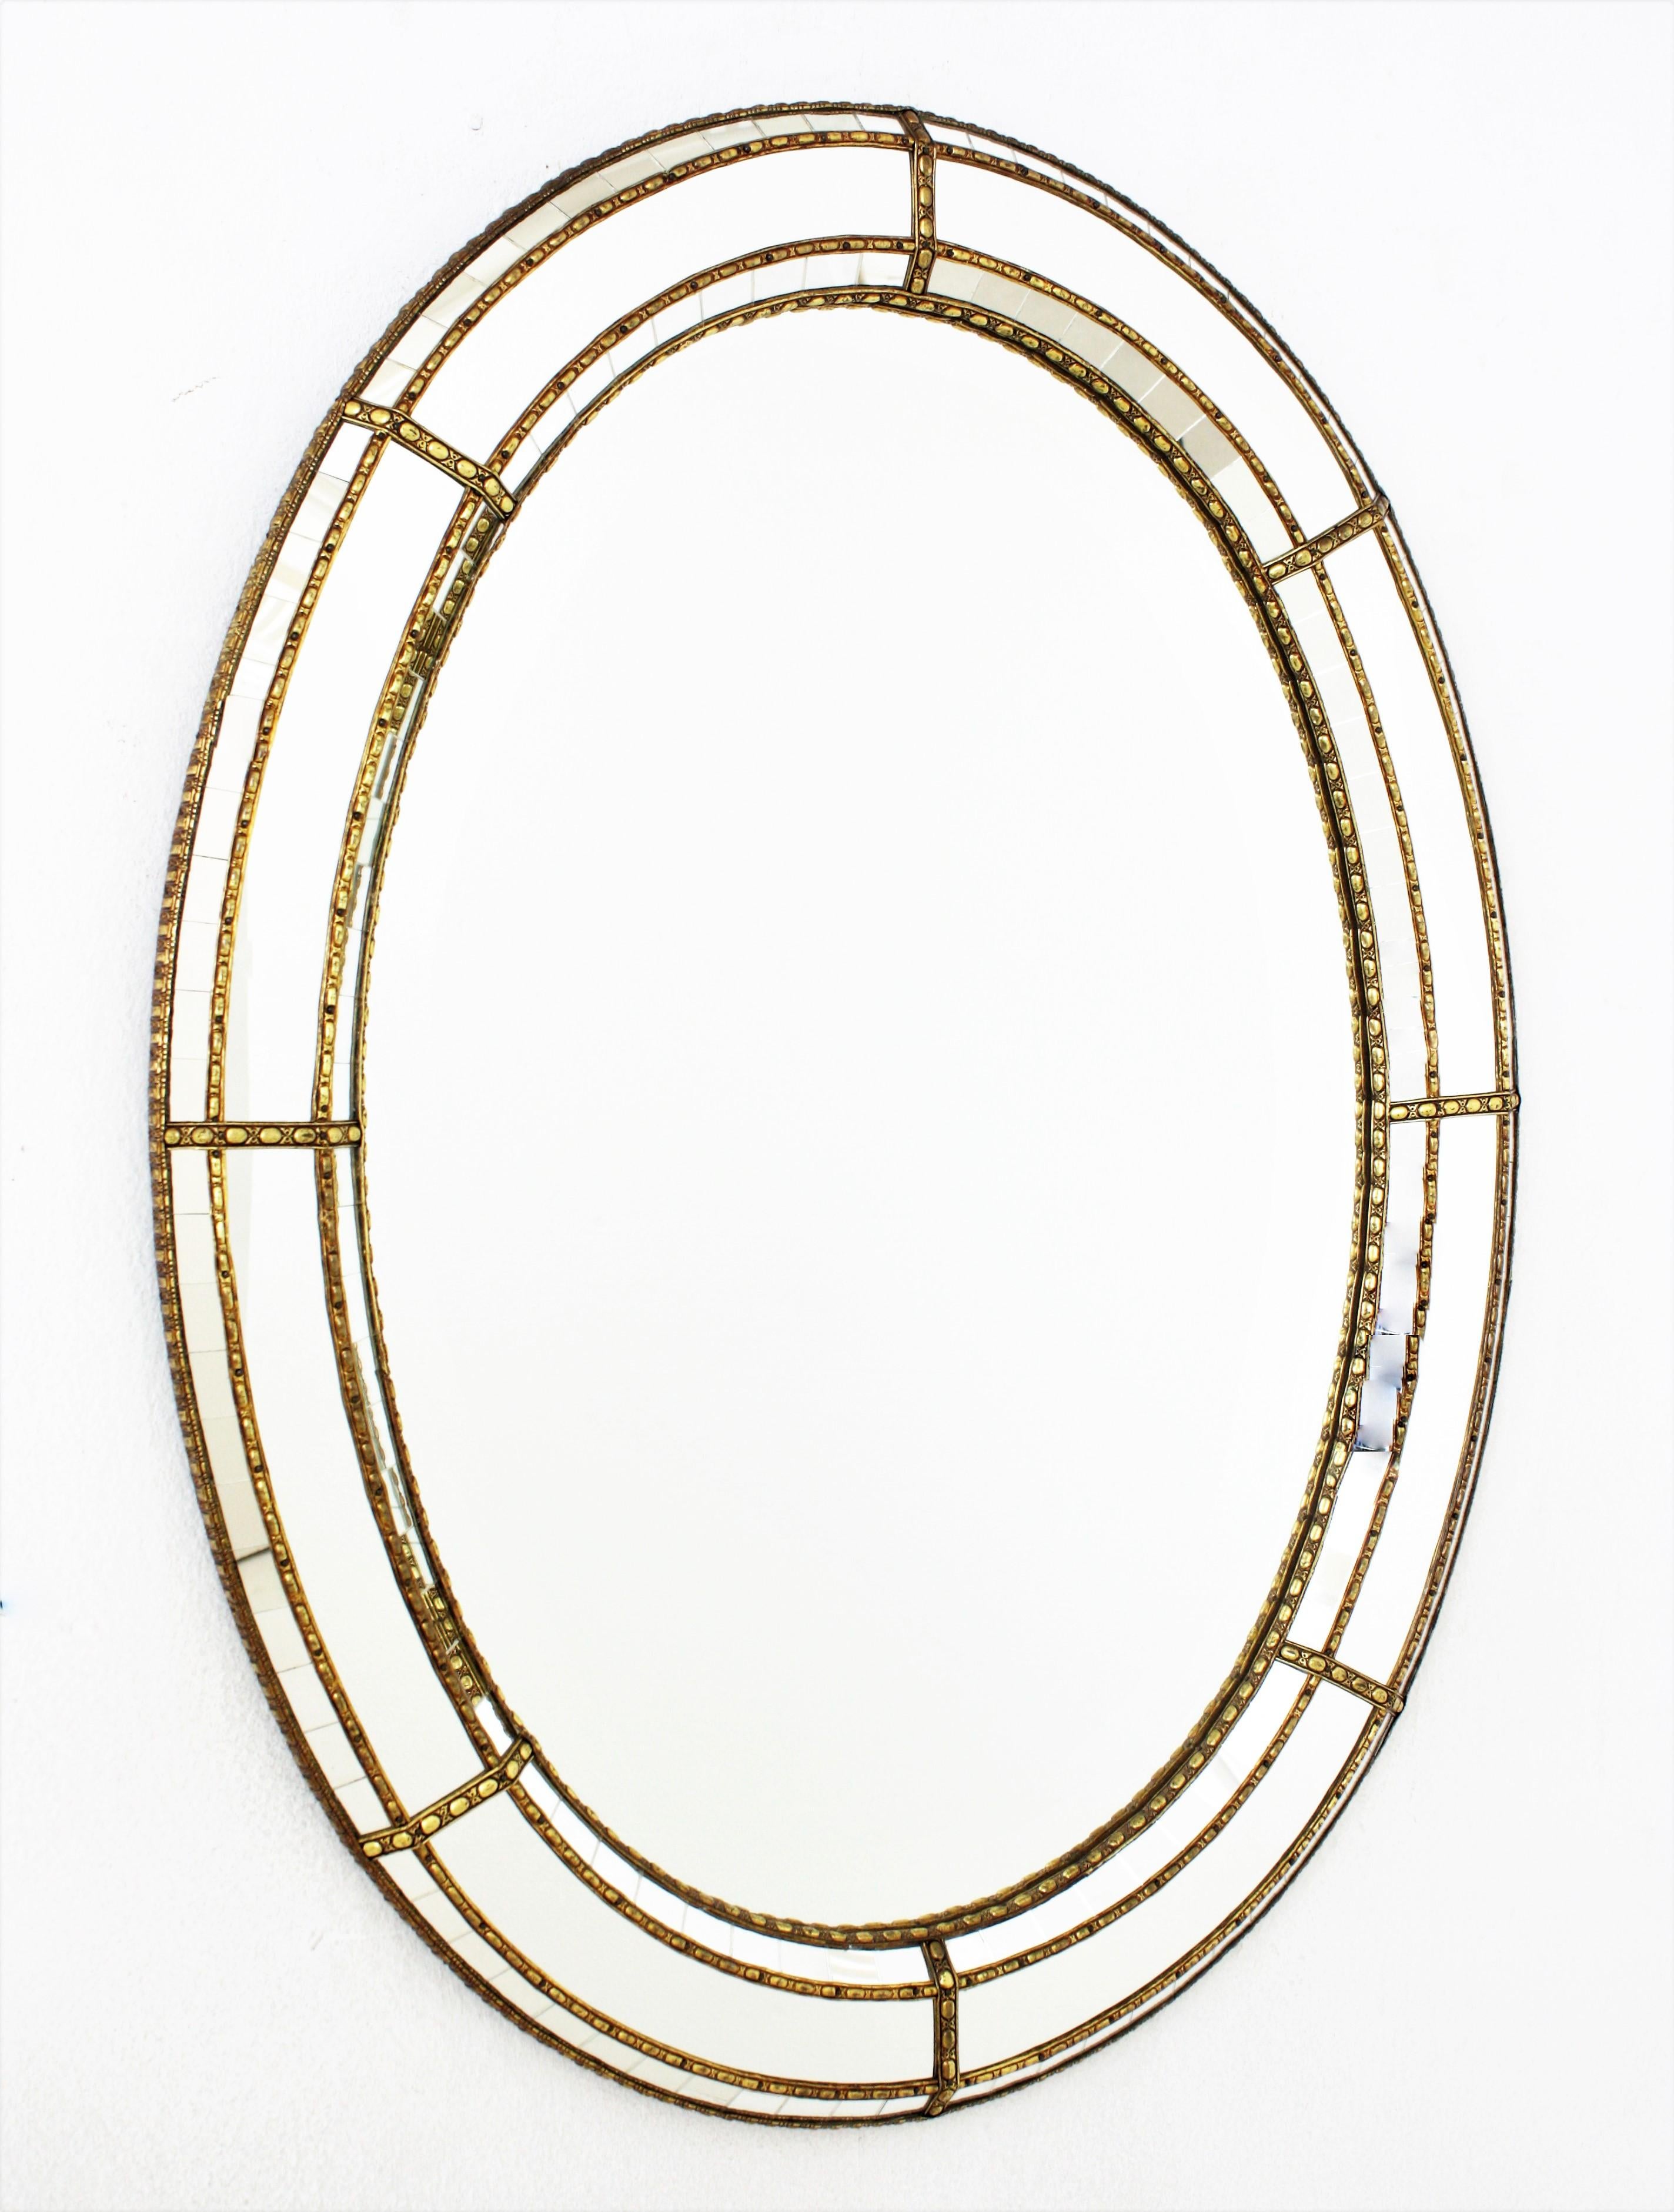 Elegant Venetian style Hollywood Regency oval mirror with brass details. Spain, 1960s
This glamorous mirror features a triple layered mirror frame made of brass. Oval form with a frame that has three layers of decorative paneled mirrors. The biger